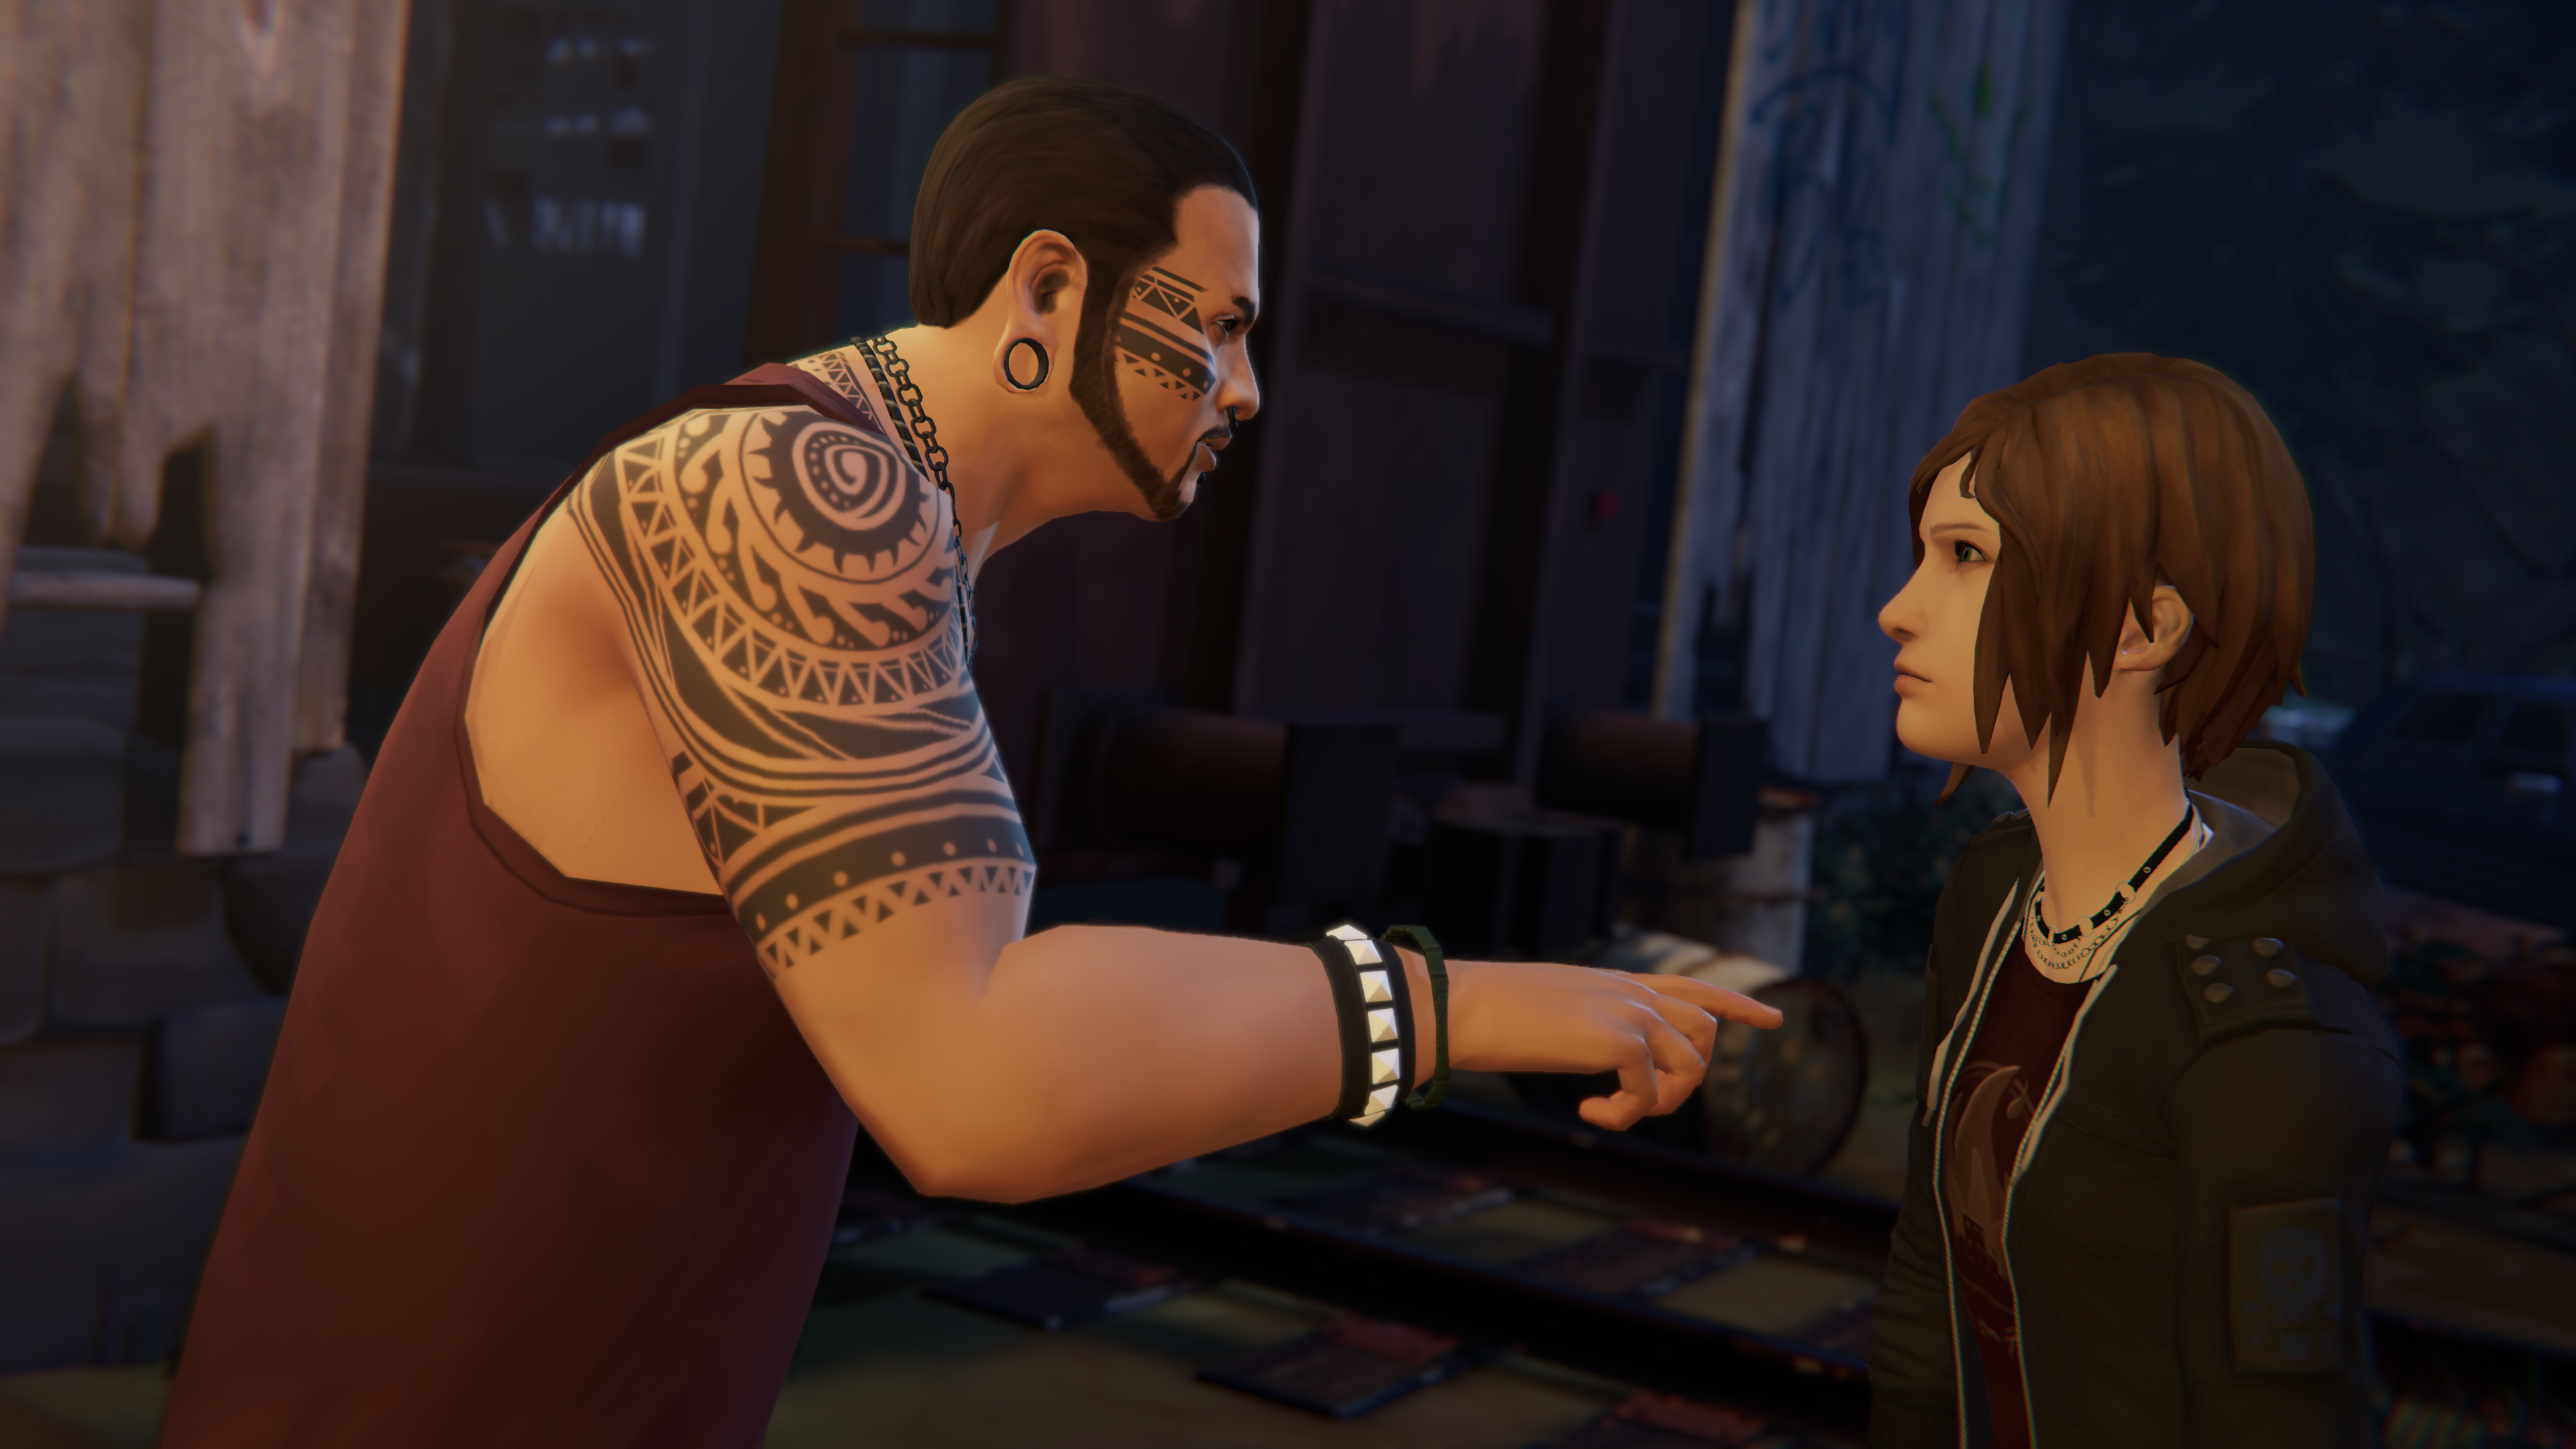 Rodney Sears, a bouncer with Samoan tattoos on the right side of his face and arm, prevents Chloe's entry to the Firewalk gig.